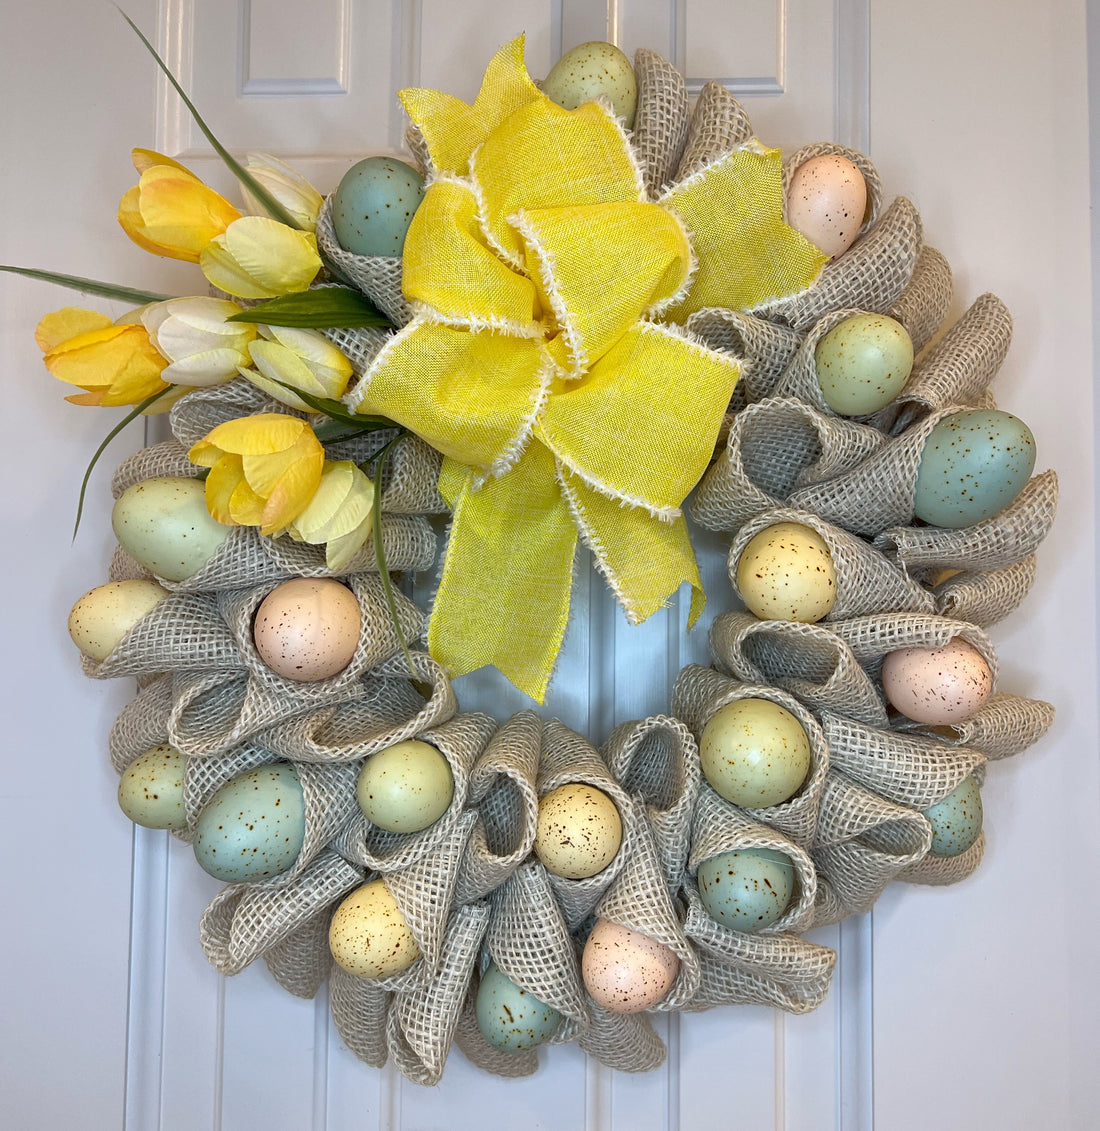 Celebrate Easter with Beautiful and Whimsical Easter Wreaths